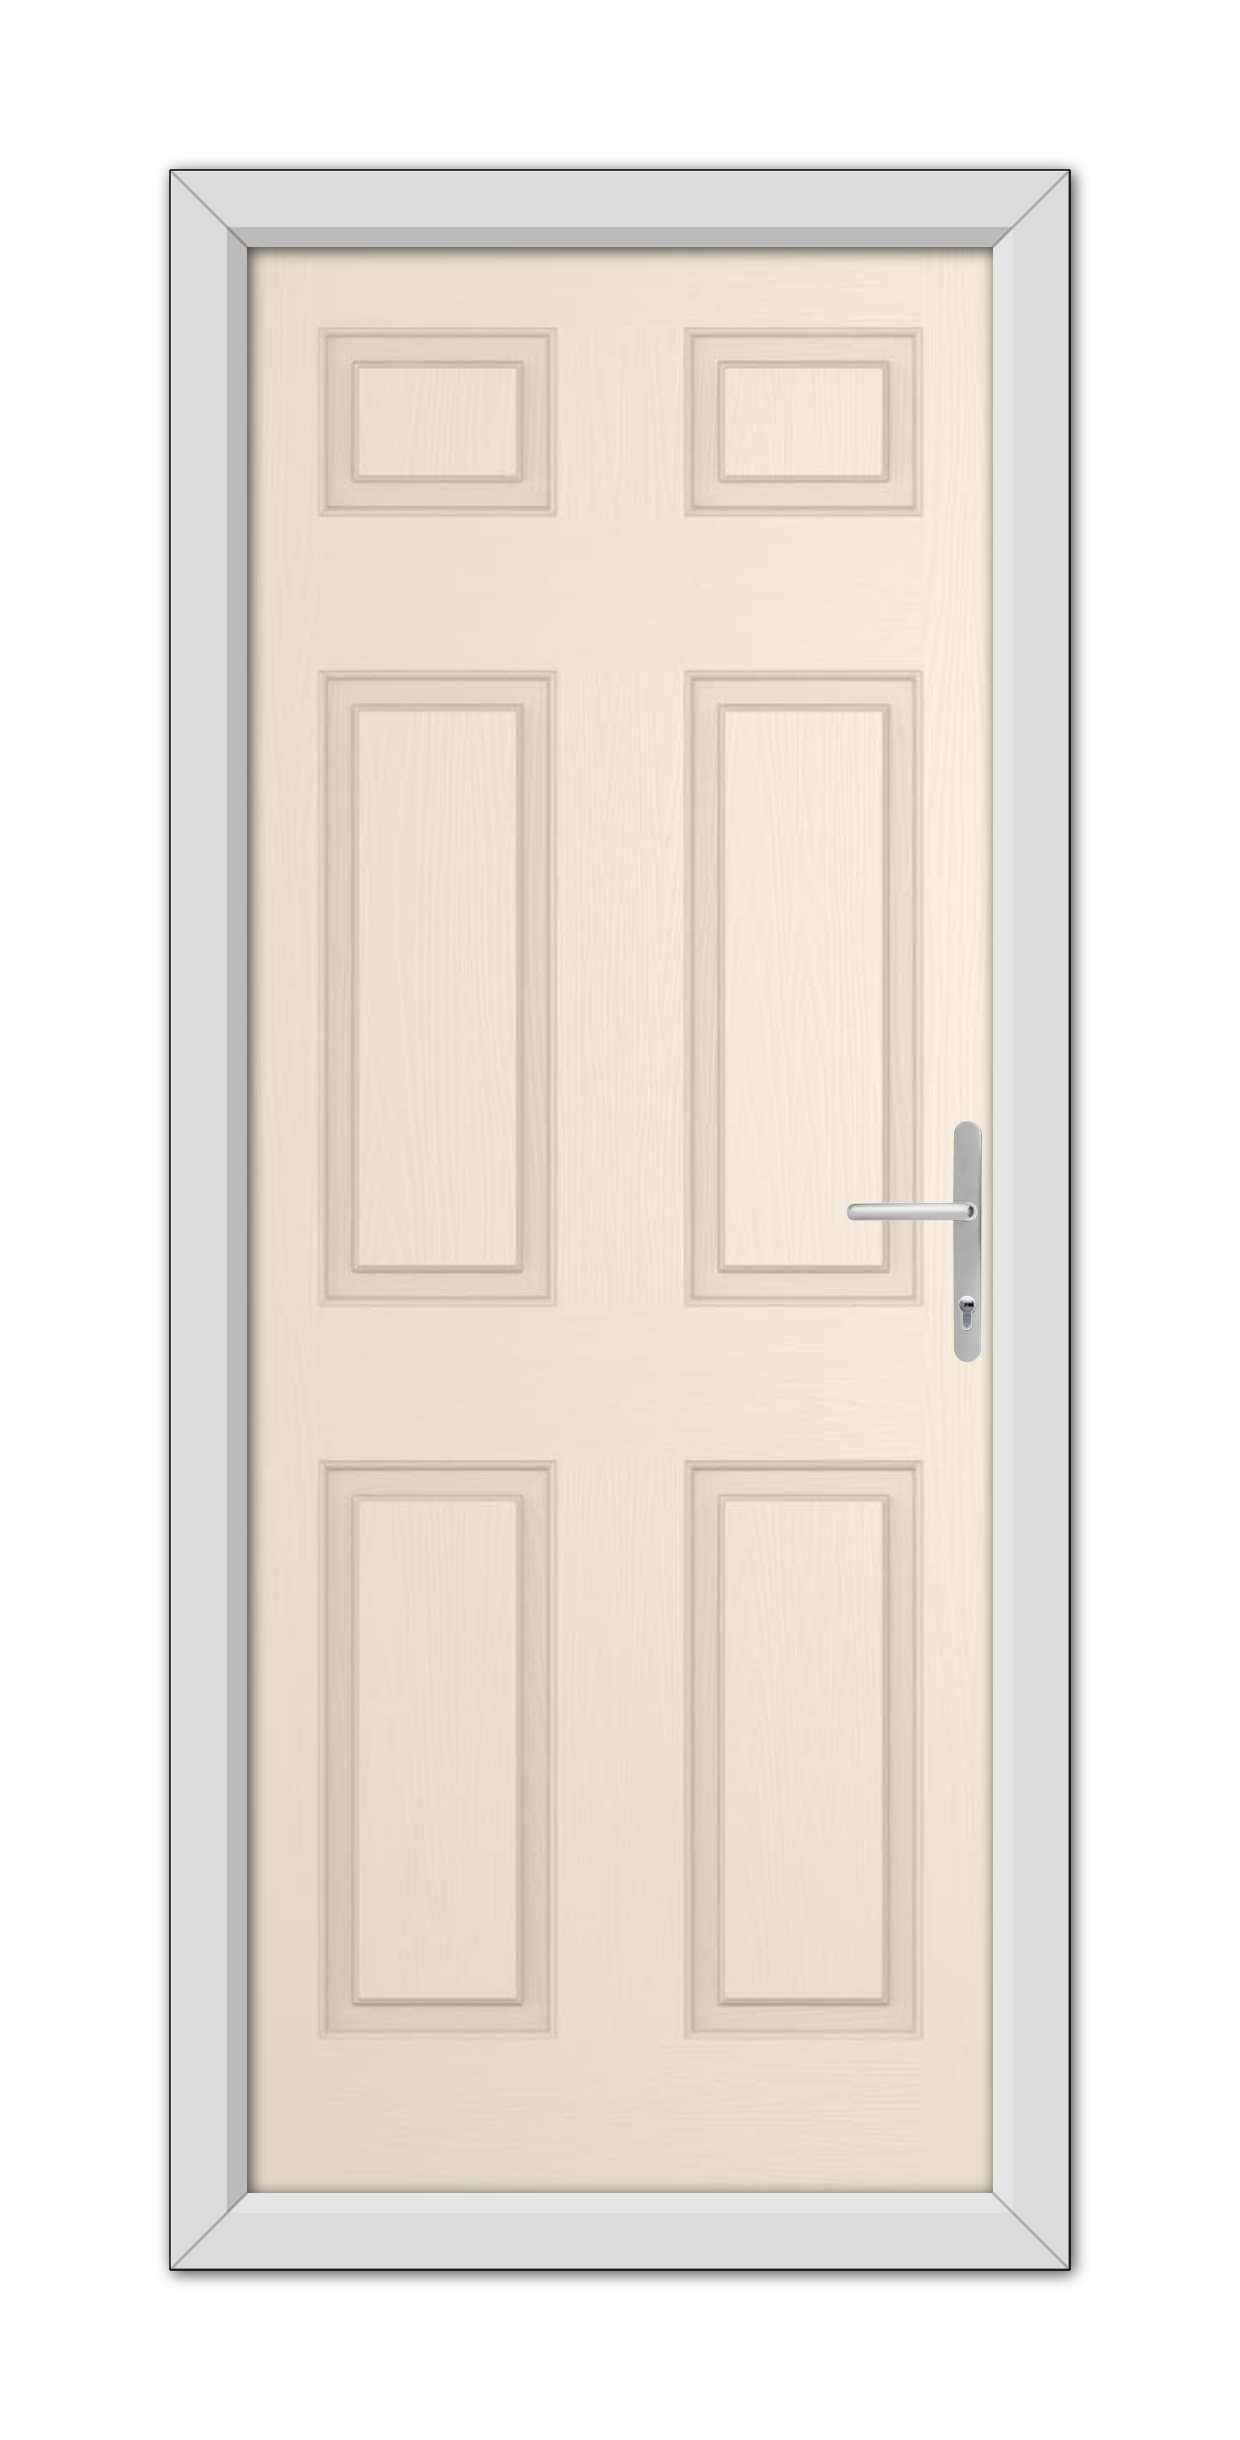 A cream Middleton solid composite door with a metallic handle, featuring six panels, set within a plain frame, viewed from the front.